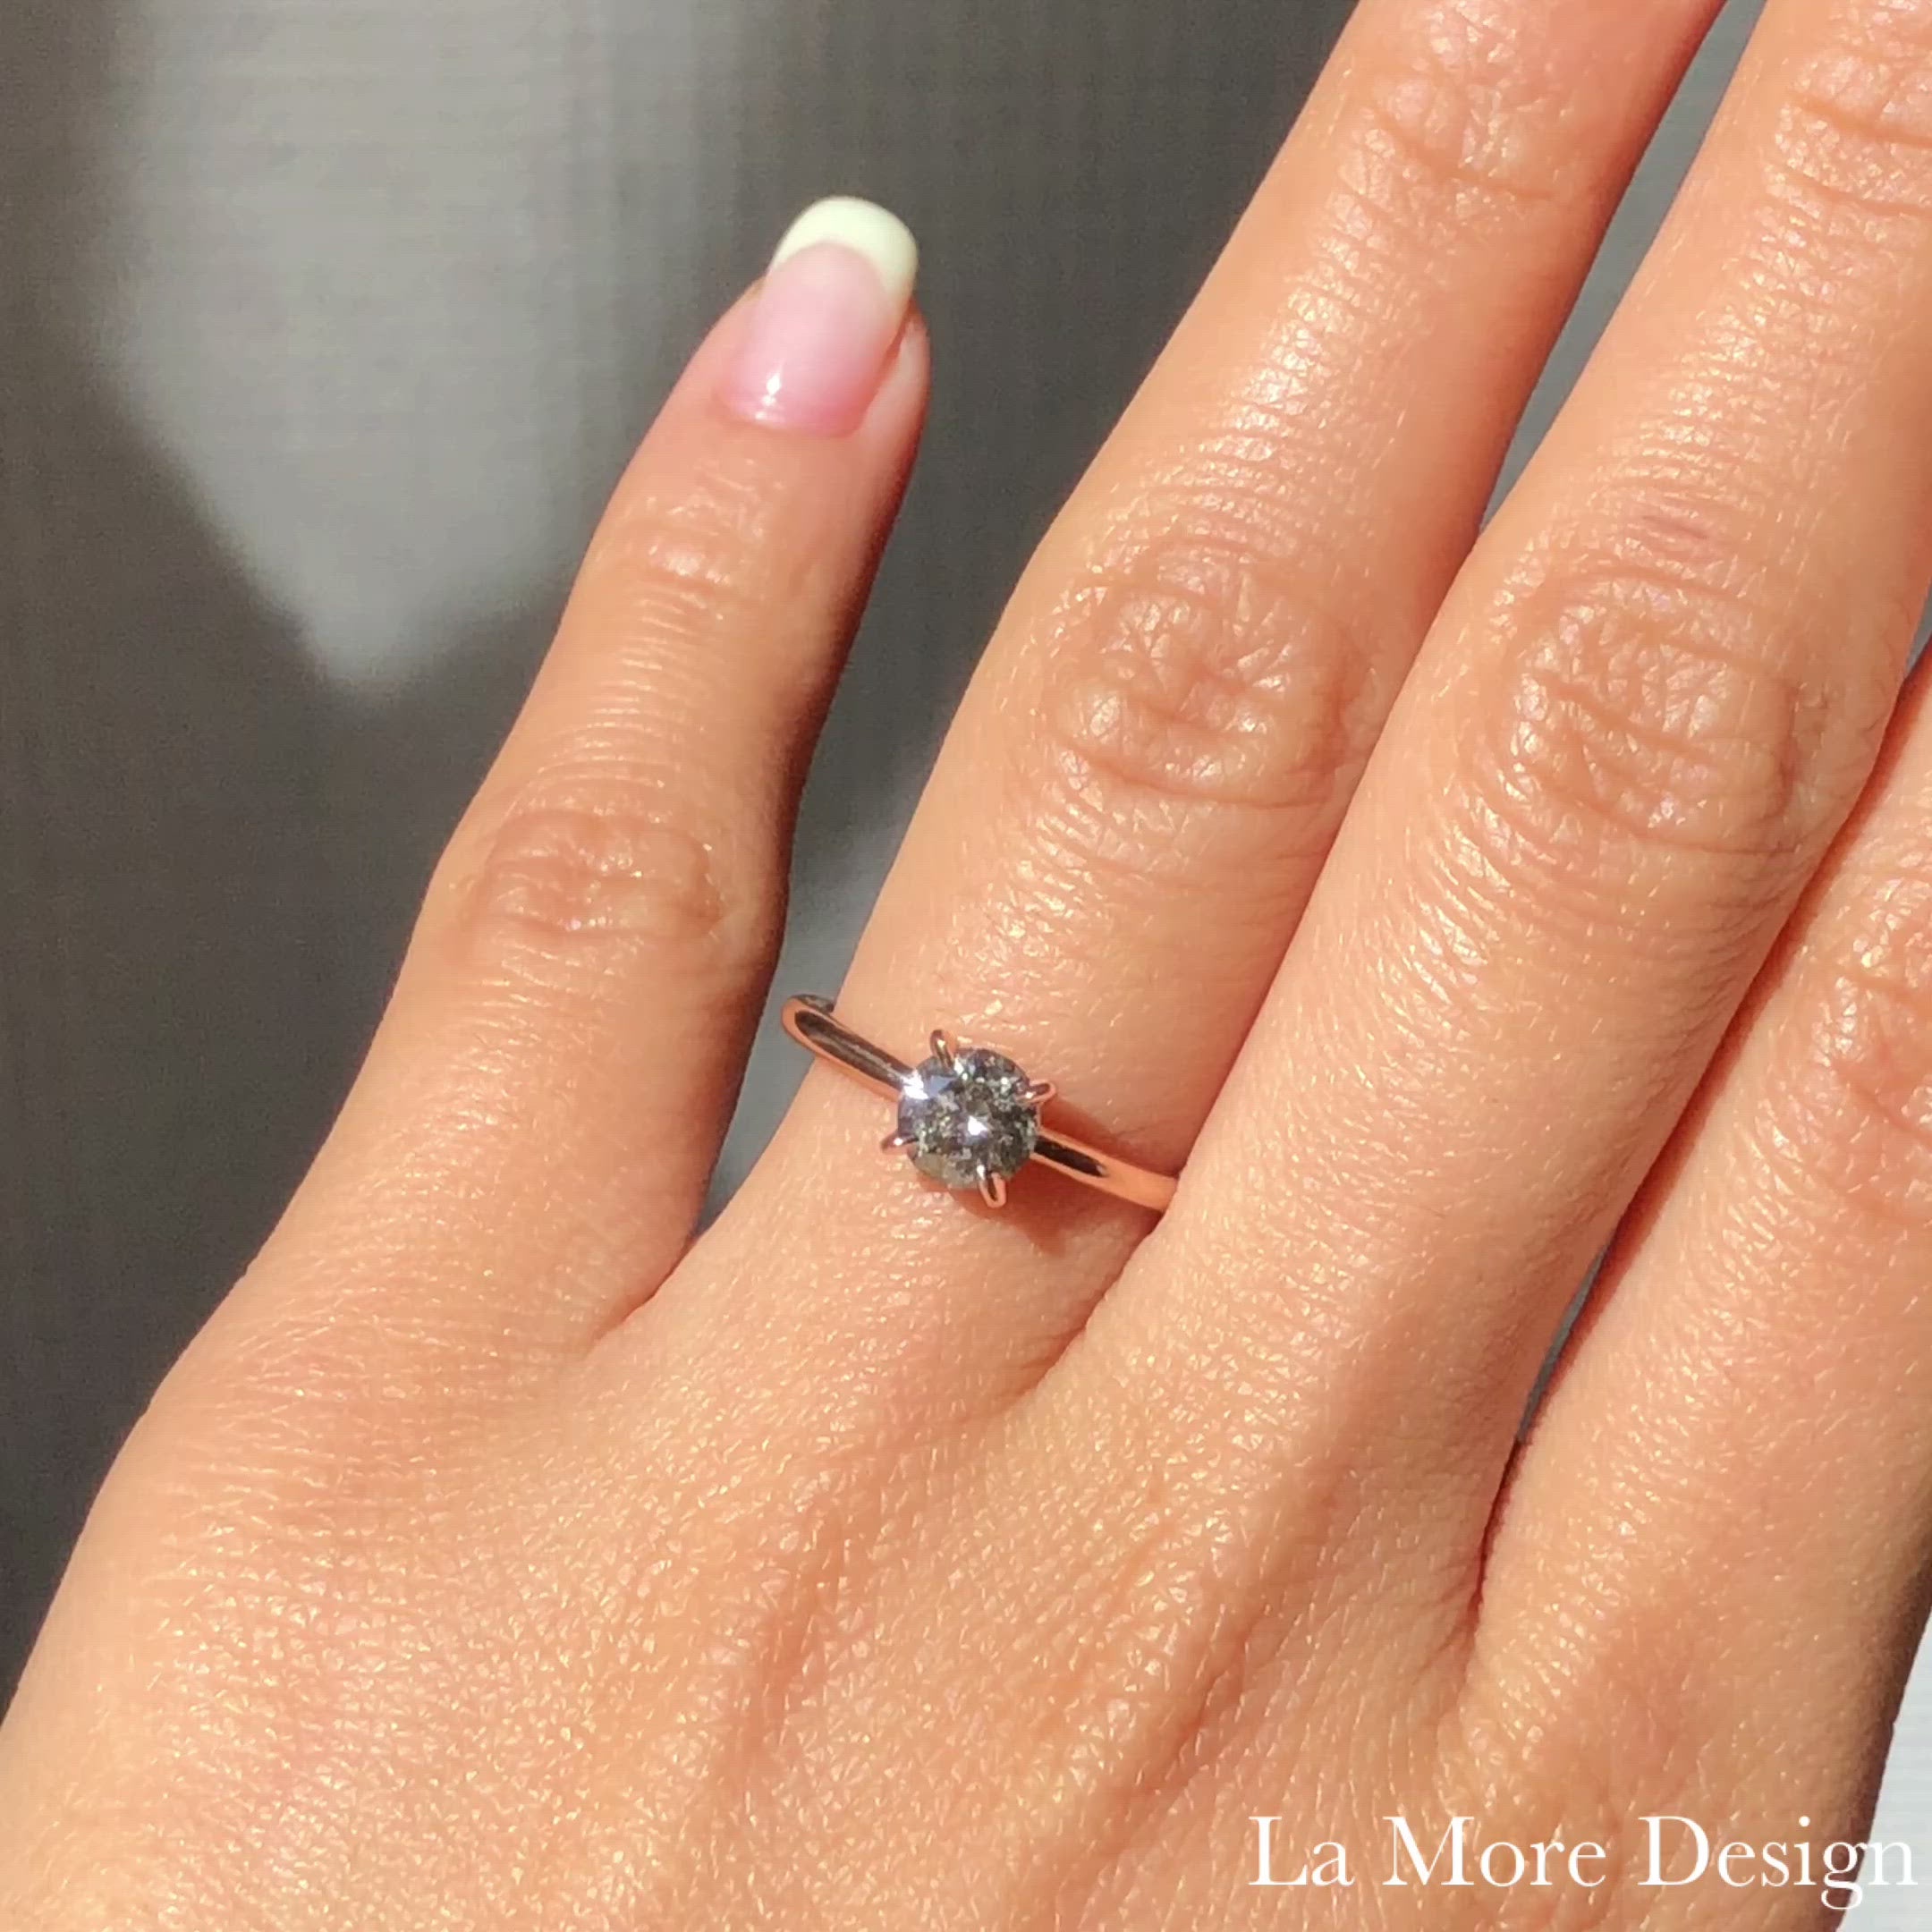 Low Profile Engagement Rings | With Clarity